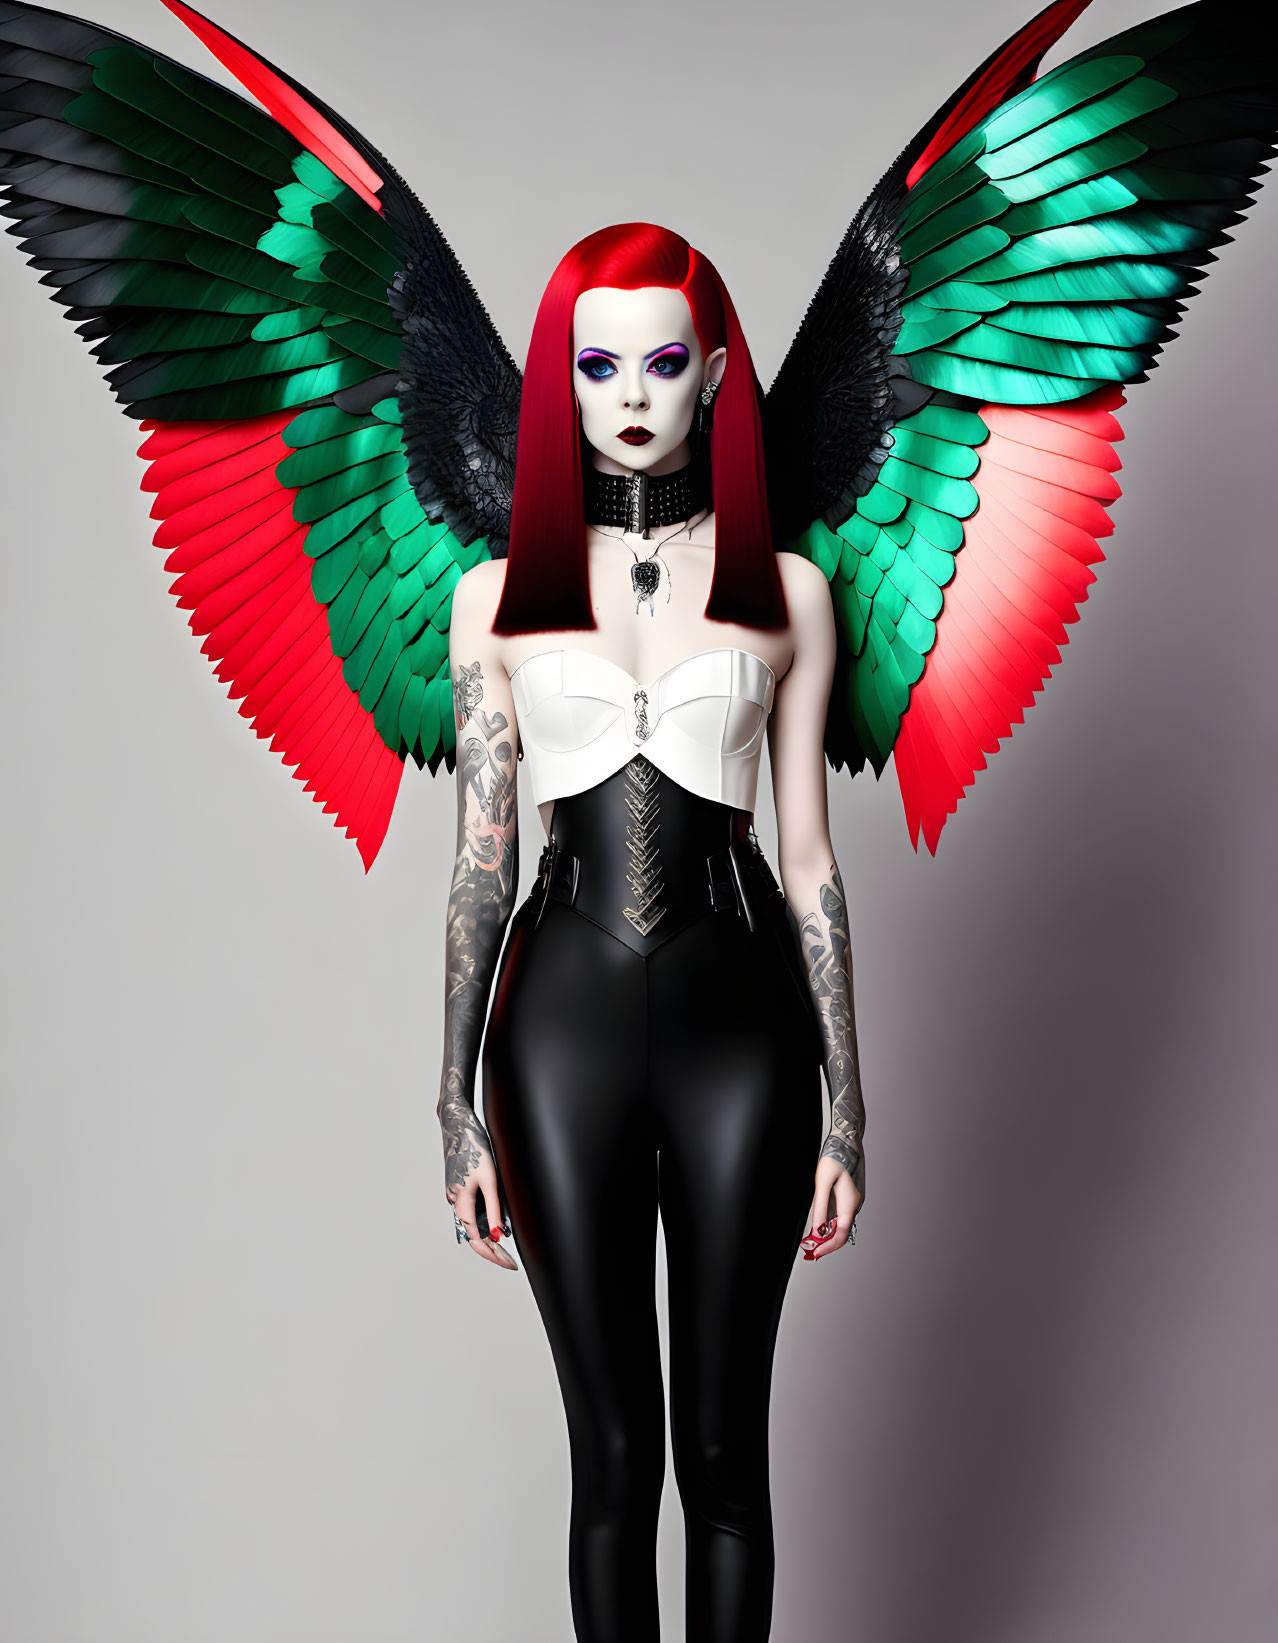 Stylized woman with red and black wings, tattoos, corset, and black pants.